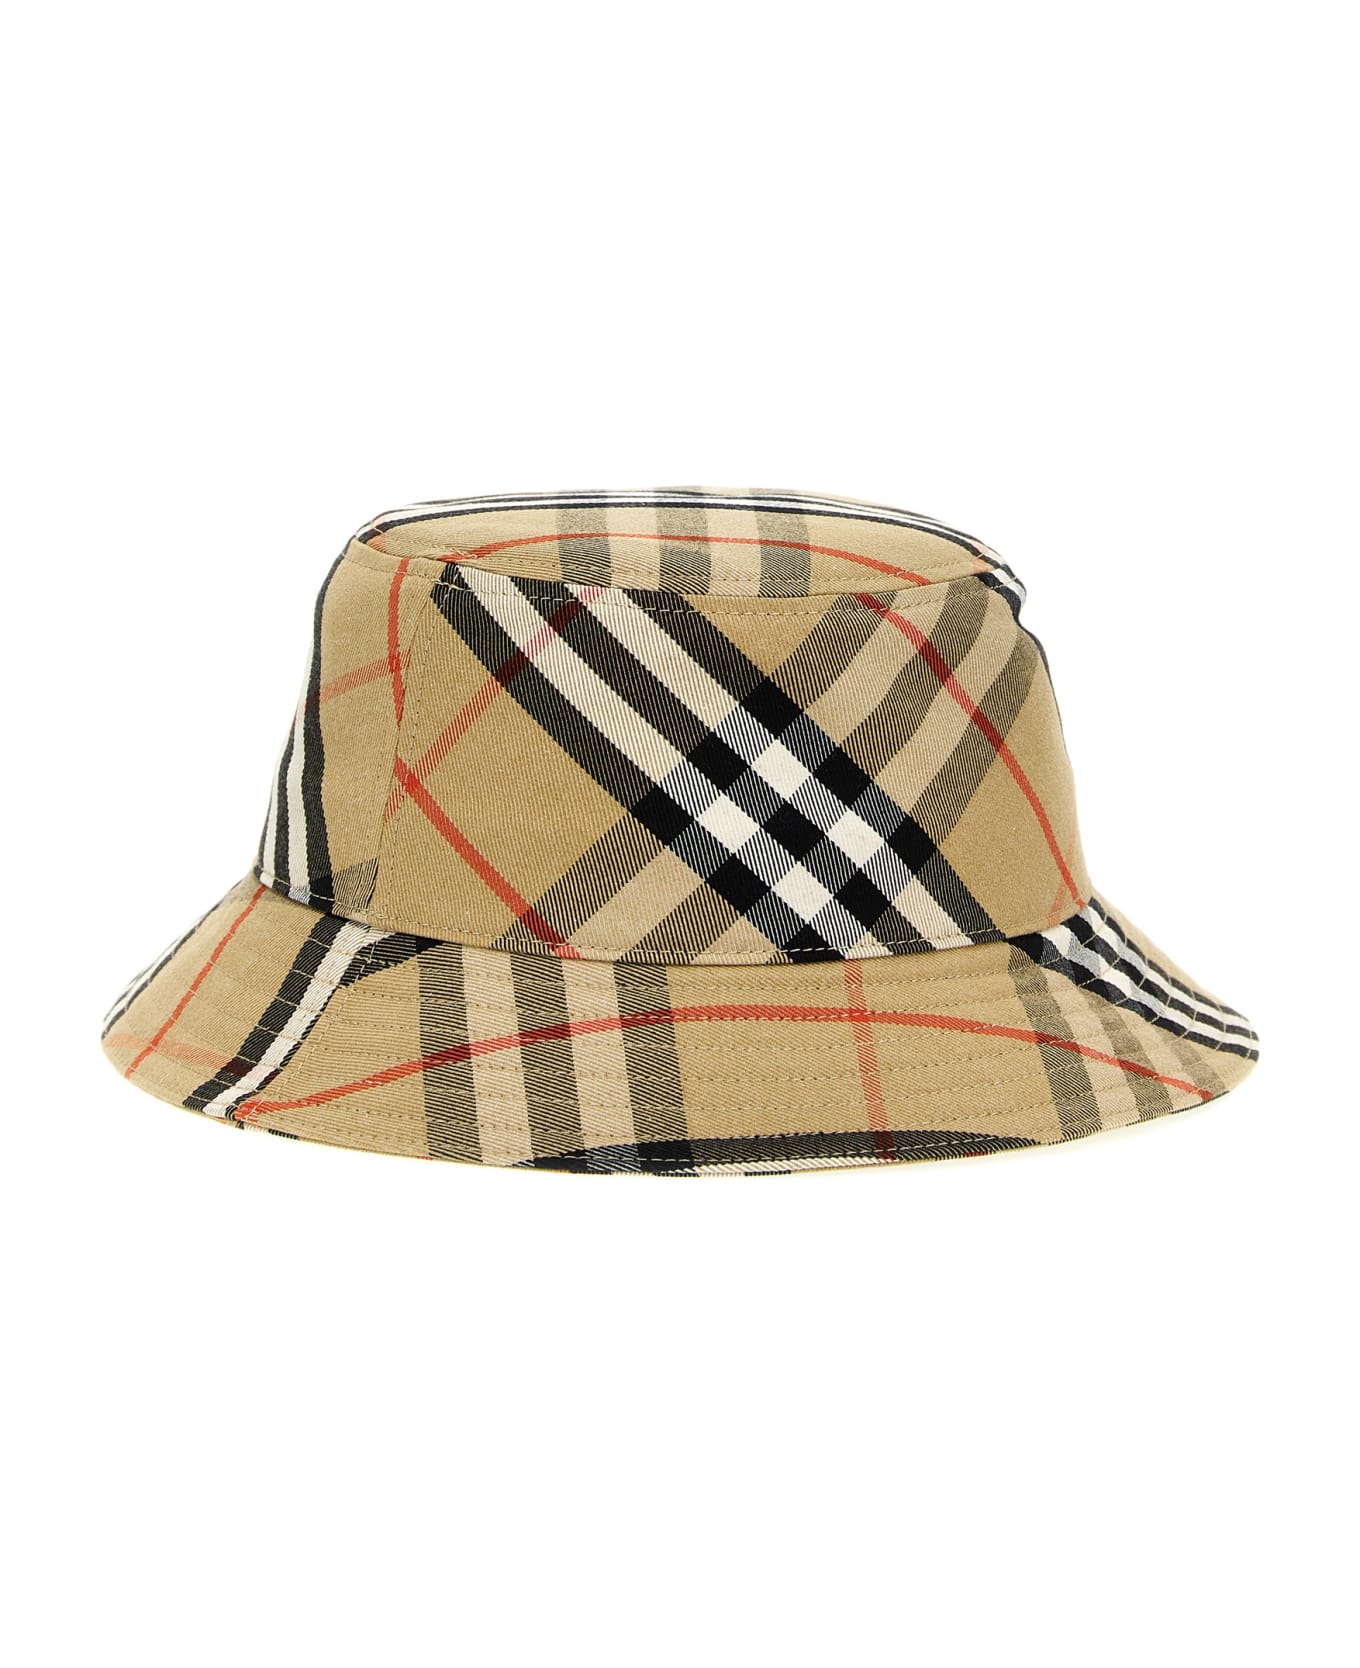 Burberry Logo Embroidery Check Bucket Hat - Beige